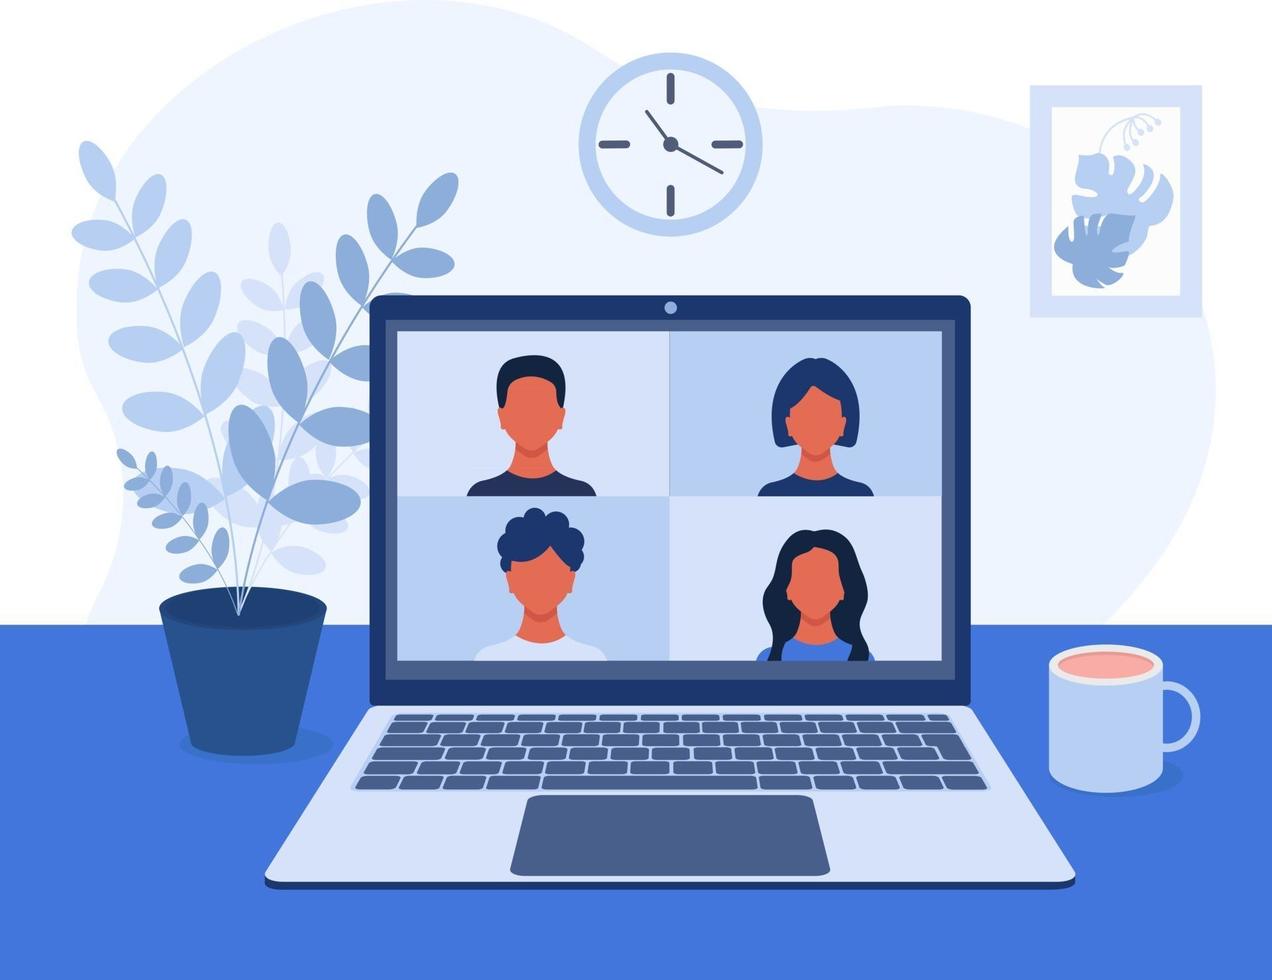 Video conference online video communication with colleagues friends and students in a home or office environment Remote work training Laptop screen with four people Vector illustration in flat